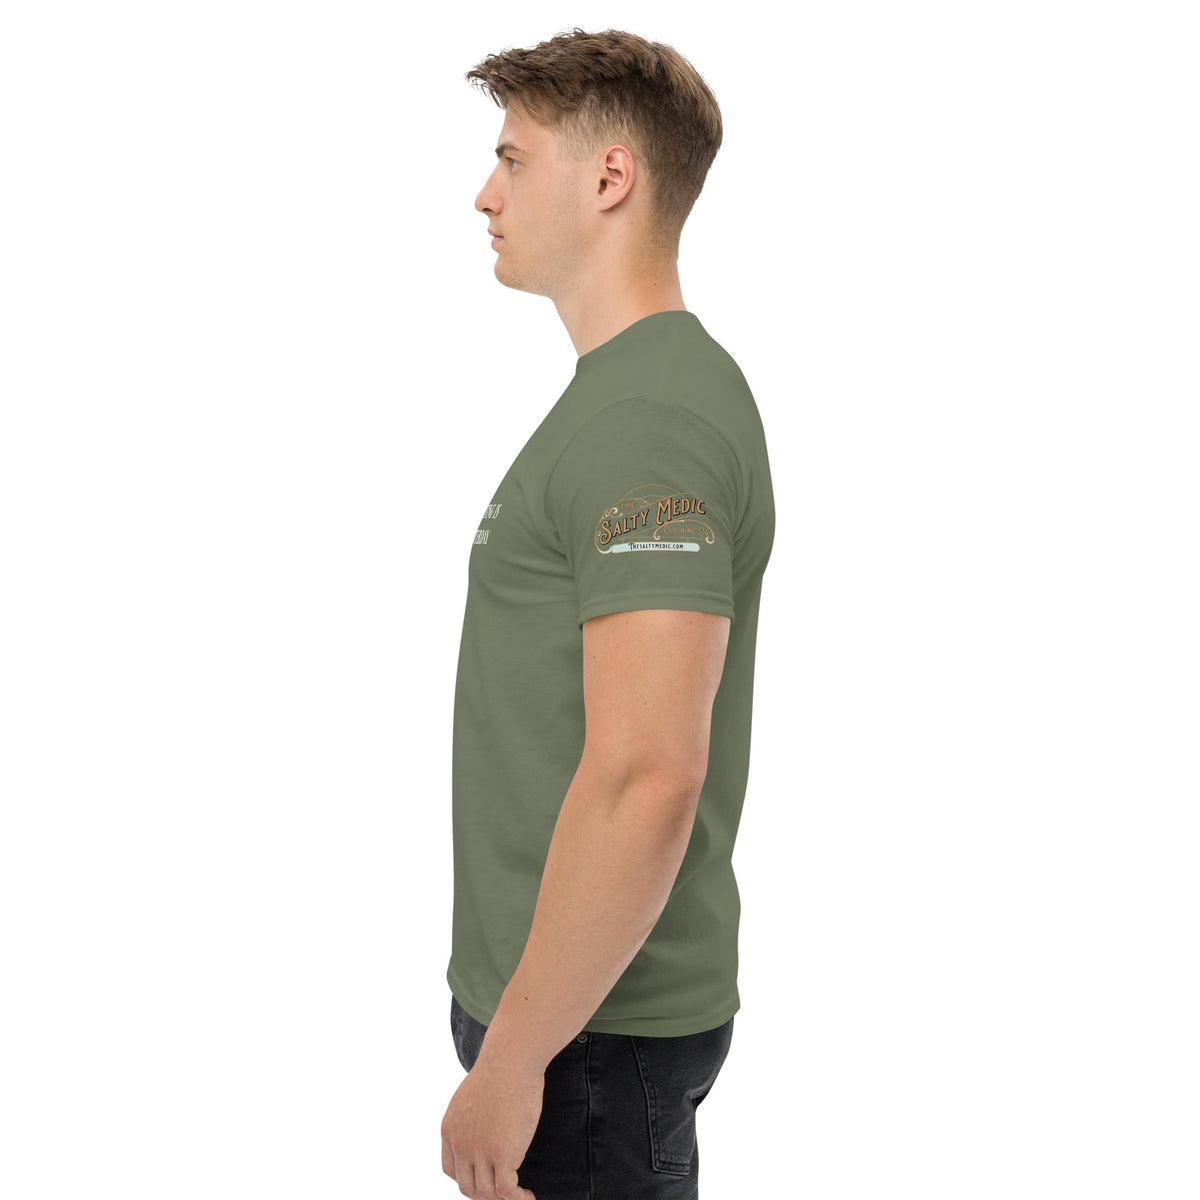 Today's safety meeting Men's classic tee - Salty Medic Clothing Co.